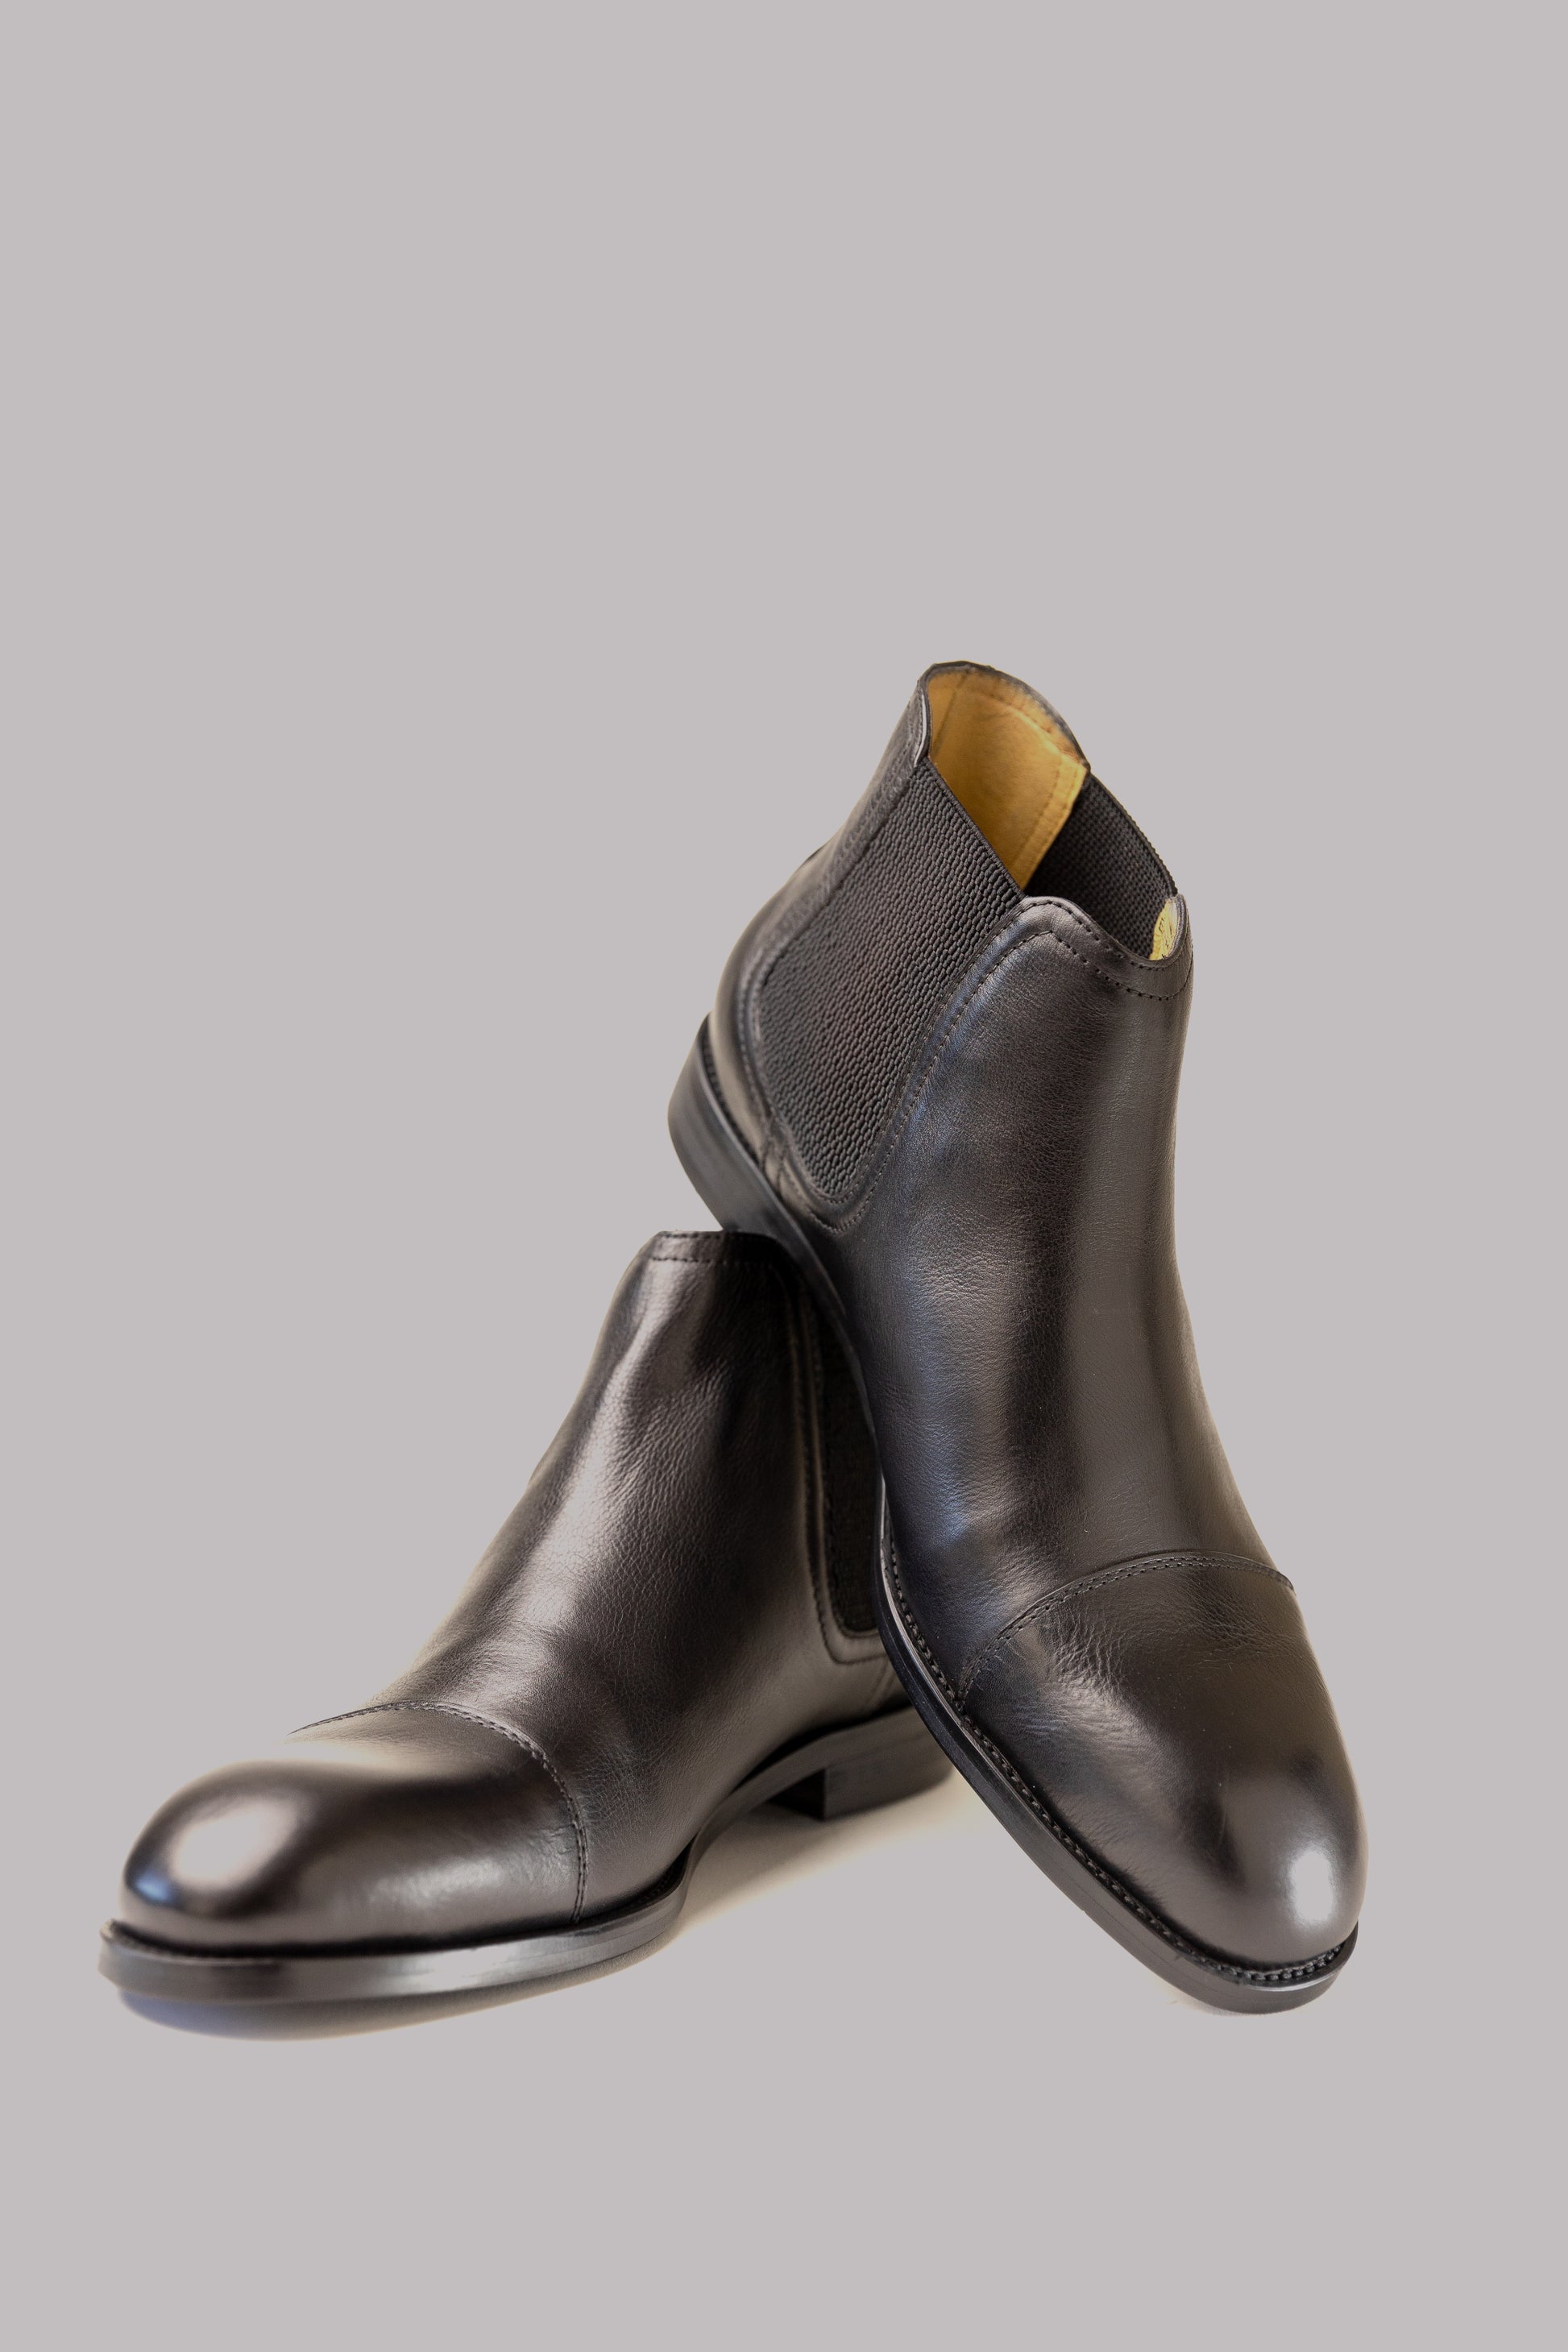 The best leather boots that is handmade in Ottwa, Canada with the highest quality. The shoe is made from 100% leather and has a full leather insole liner for comfort - The best Leather shoe in Canada.